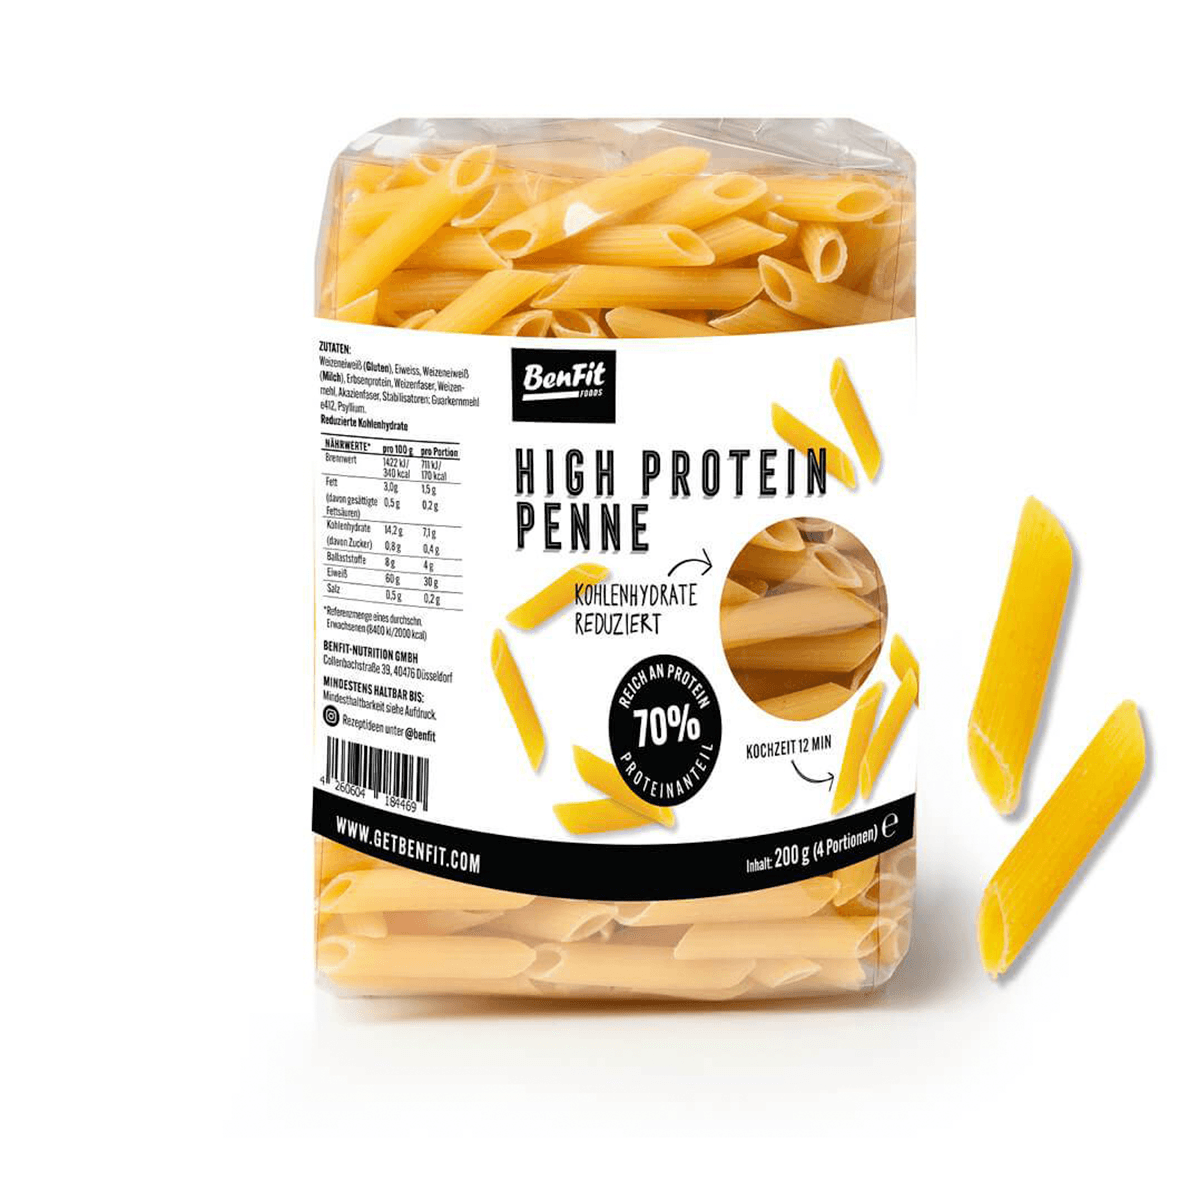 Protein low carb Nudeln (Penne) - BenFit 200g